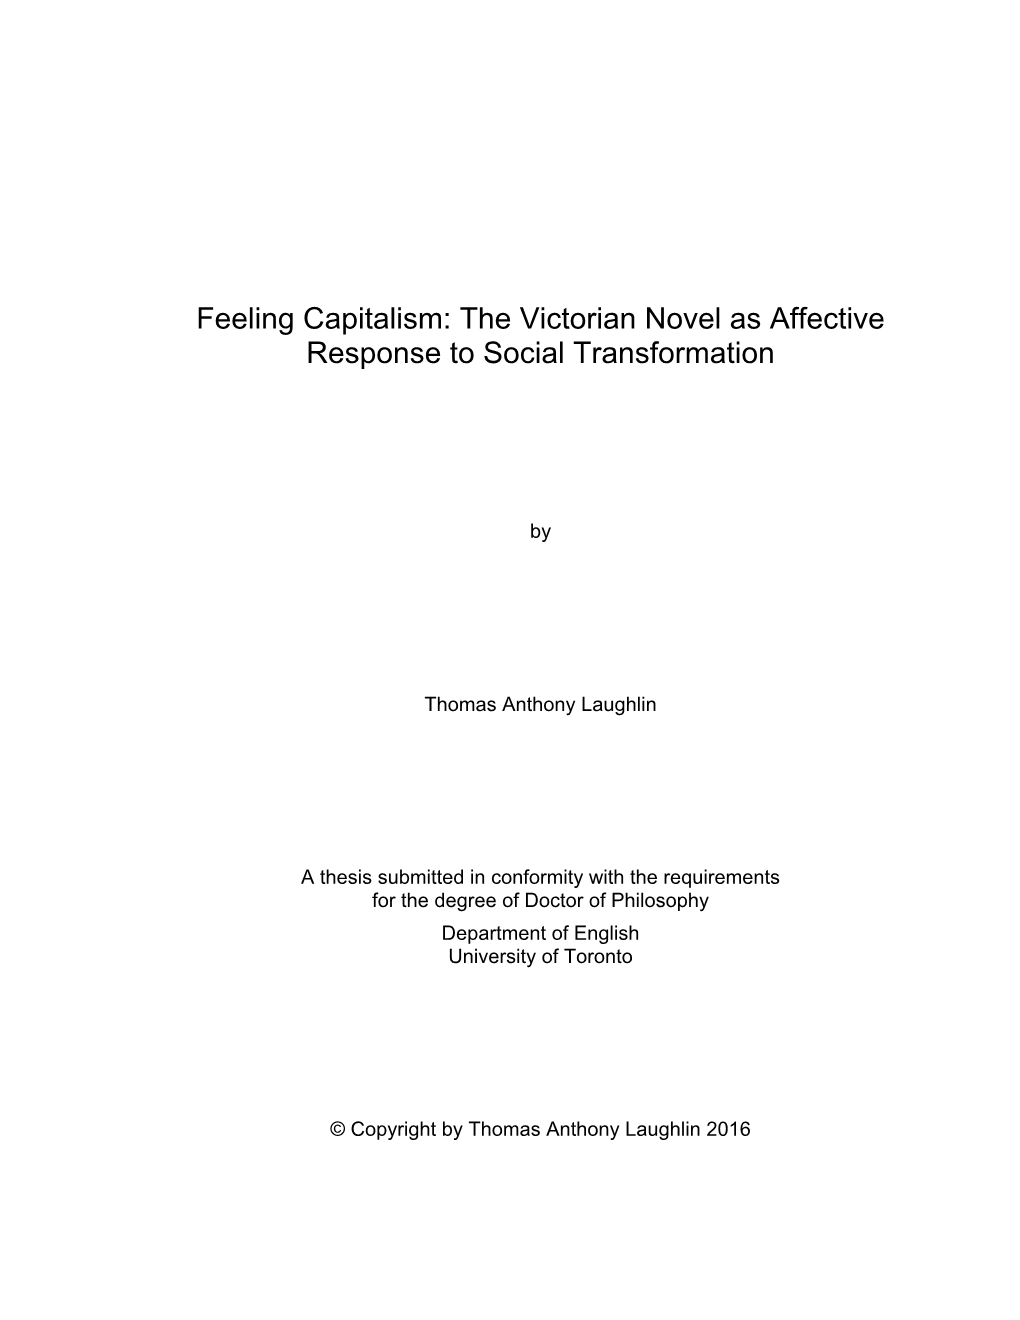 Feeling Capitalism: the Victorian Novel As Affective Response to Social Transformation